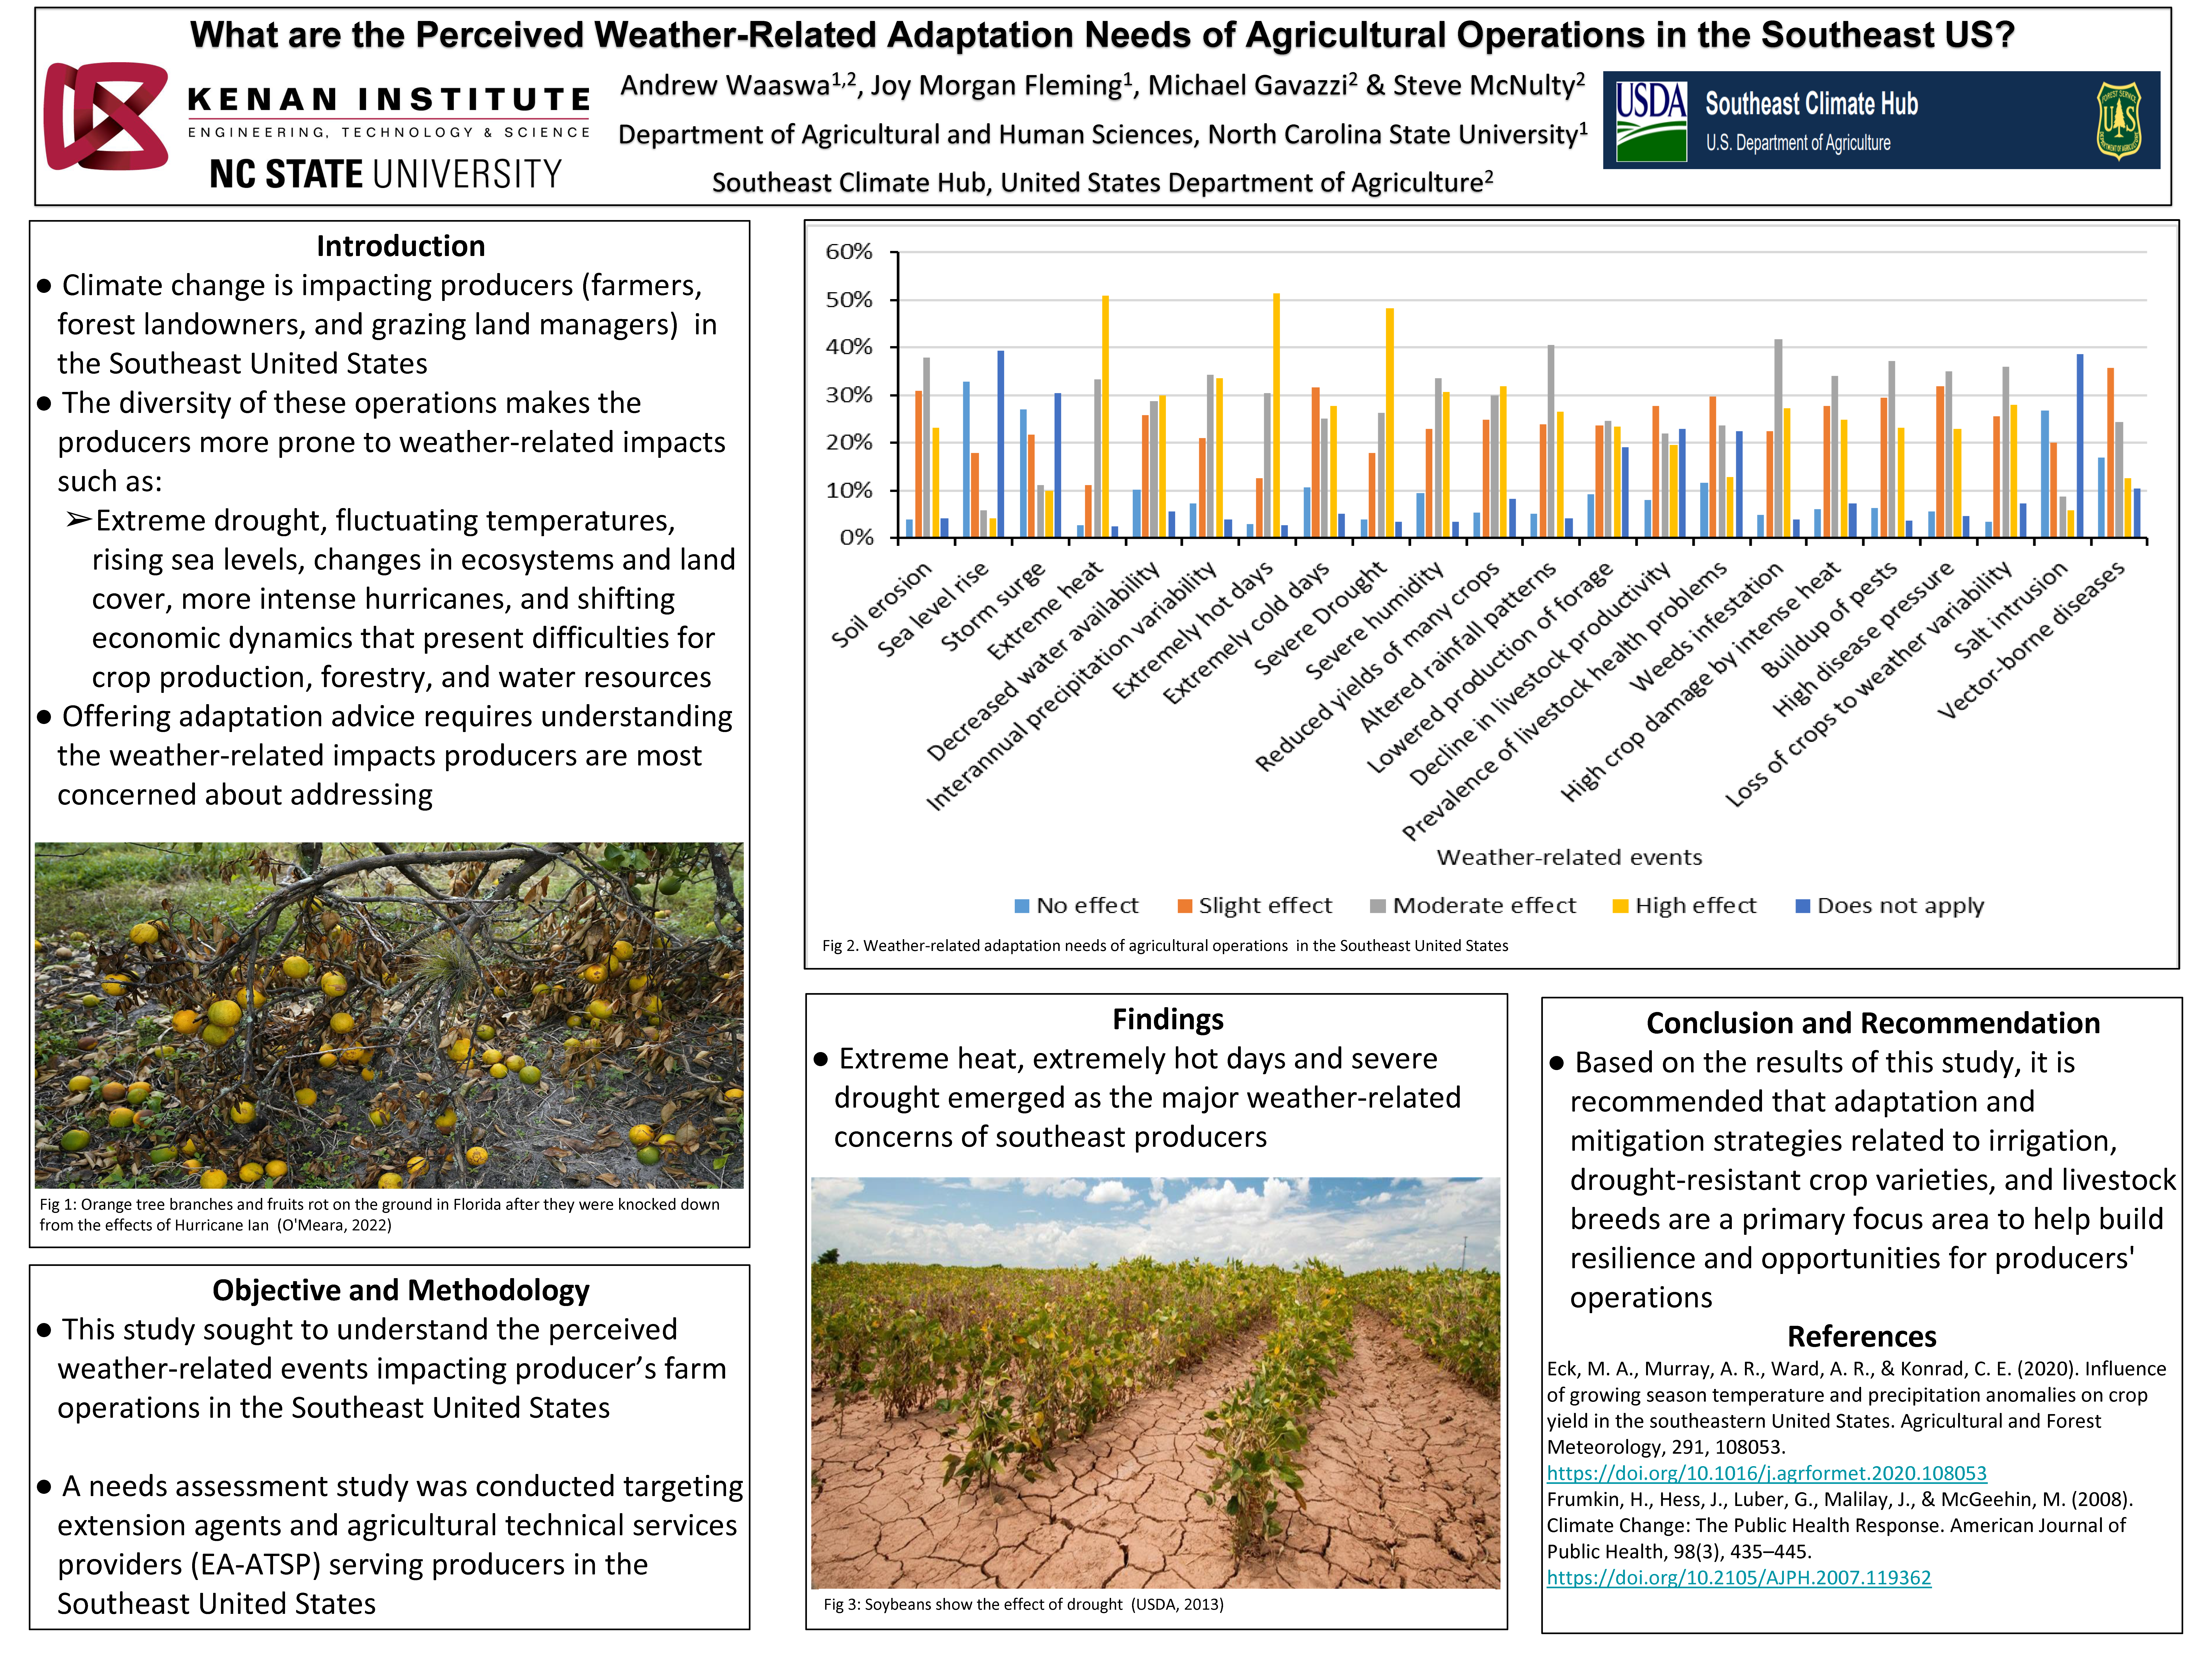 image of Andrew Waaswa's poster, "What are the Perceived Weather-Related Adaptation Needs of Agricultural Operations in the Southeast US?"